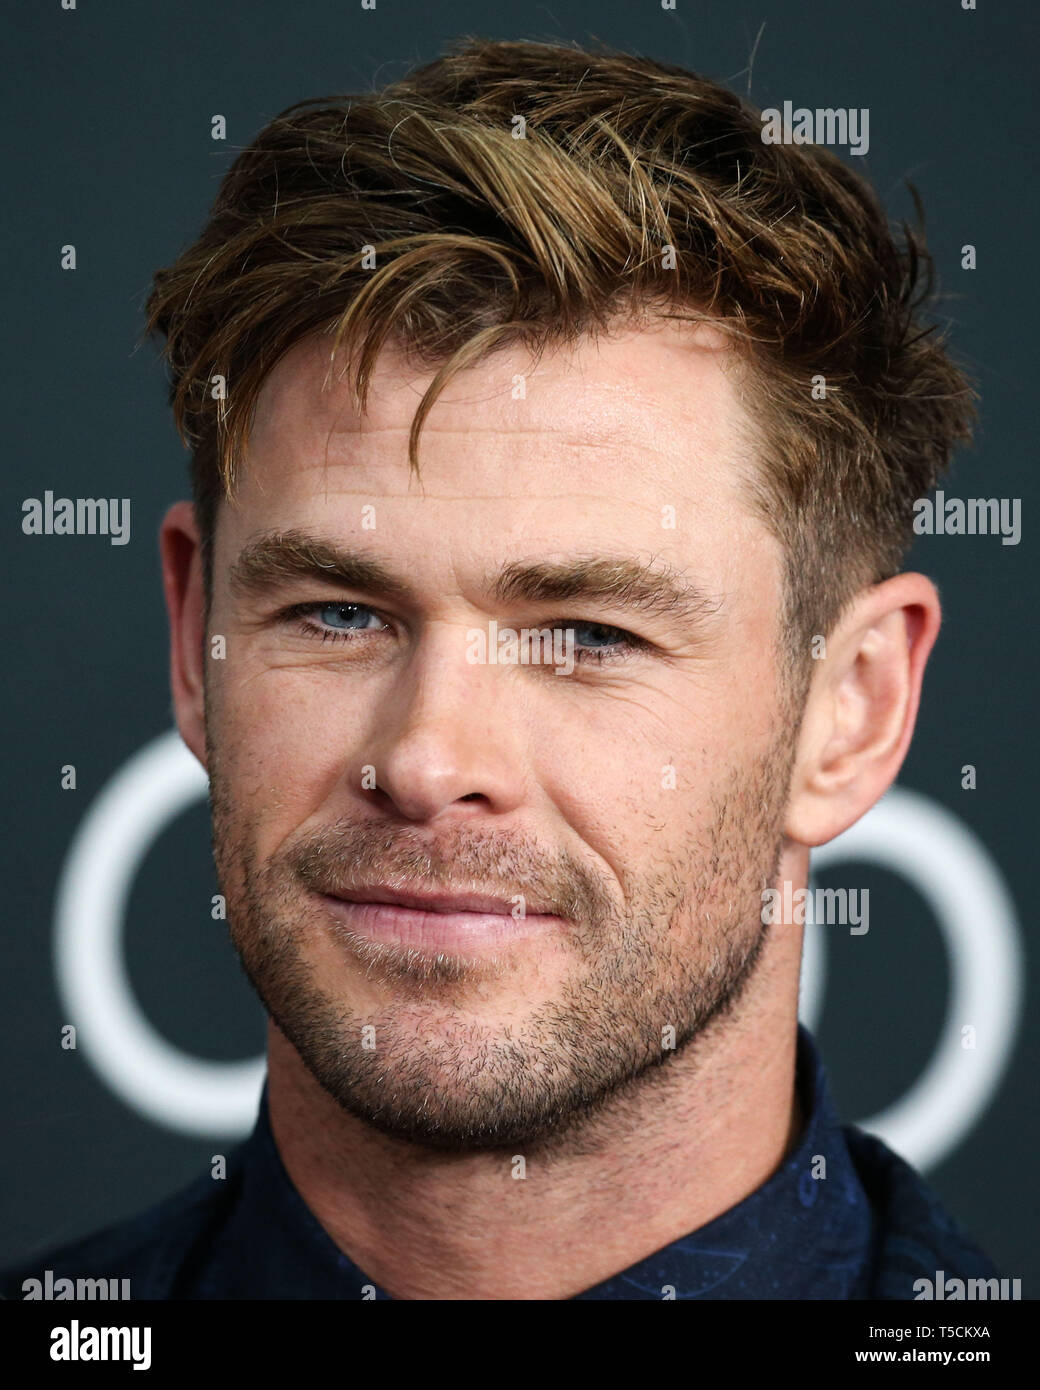 Los Angeles, United States. 22nd Apr, 2019.LOS ANGELES, CALIFORNIA, USA - APRIL 22: Actor Chris Hemsworth wearing Etro arrives at the World Premiere Of Walt Disney Studios Motion Pictures and Marvel Studios' 'Avengers: Endgame' held at the Los Angeles Convention Center on April 22, 2019 in Los Angeles, California, United States. (Photo by Xavier Collin/Image Press Agency) Credit: Image Press Agency/Alamy Live News Stock Photo